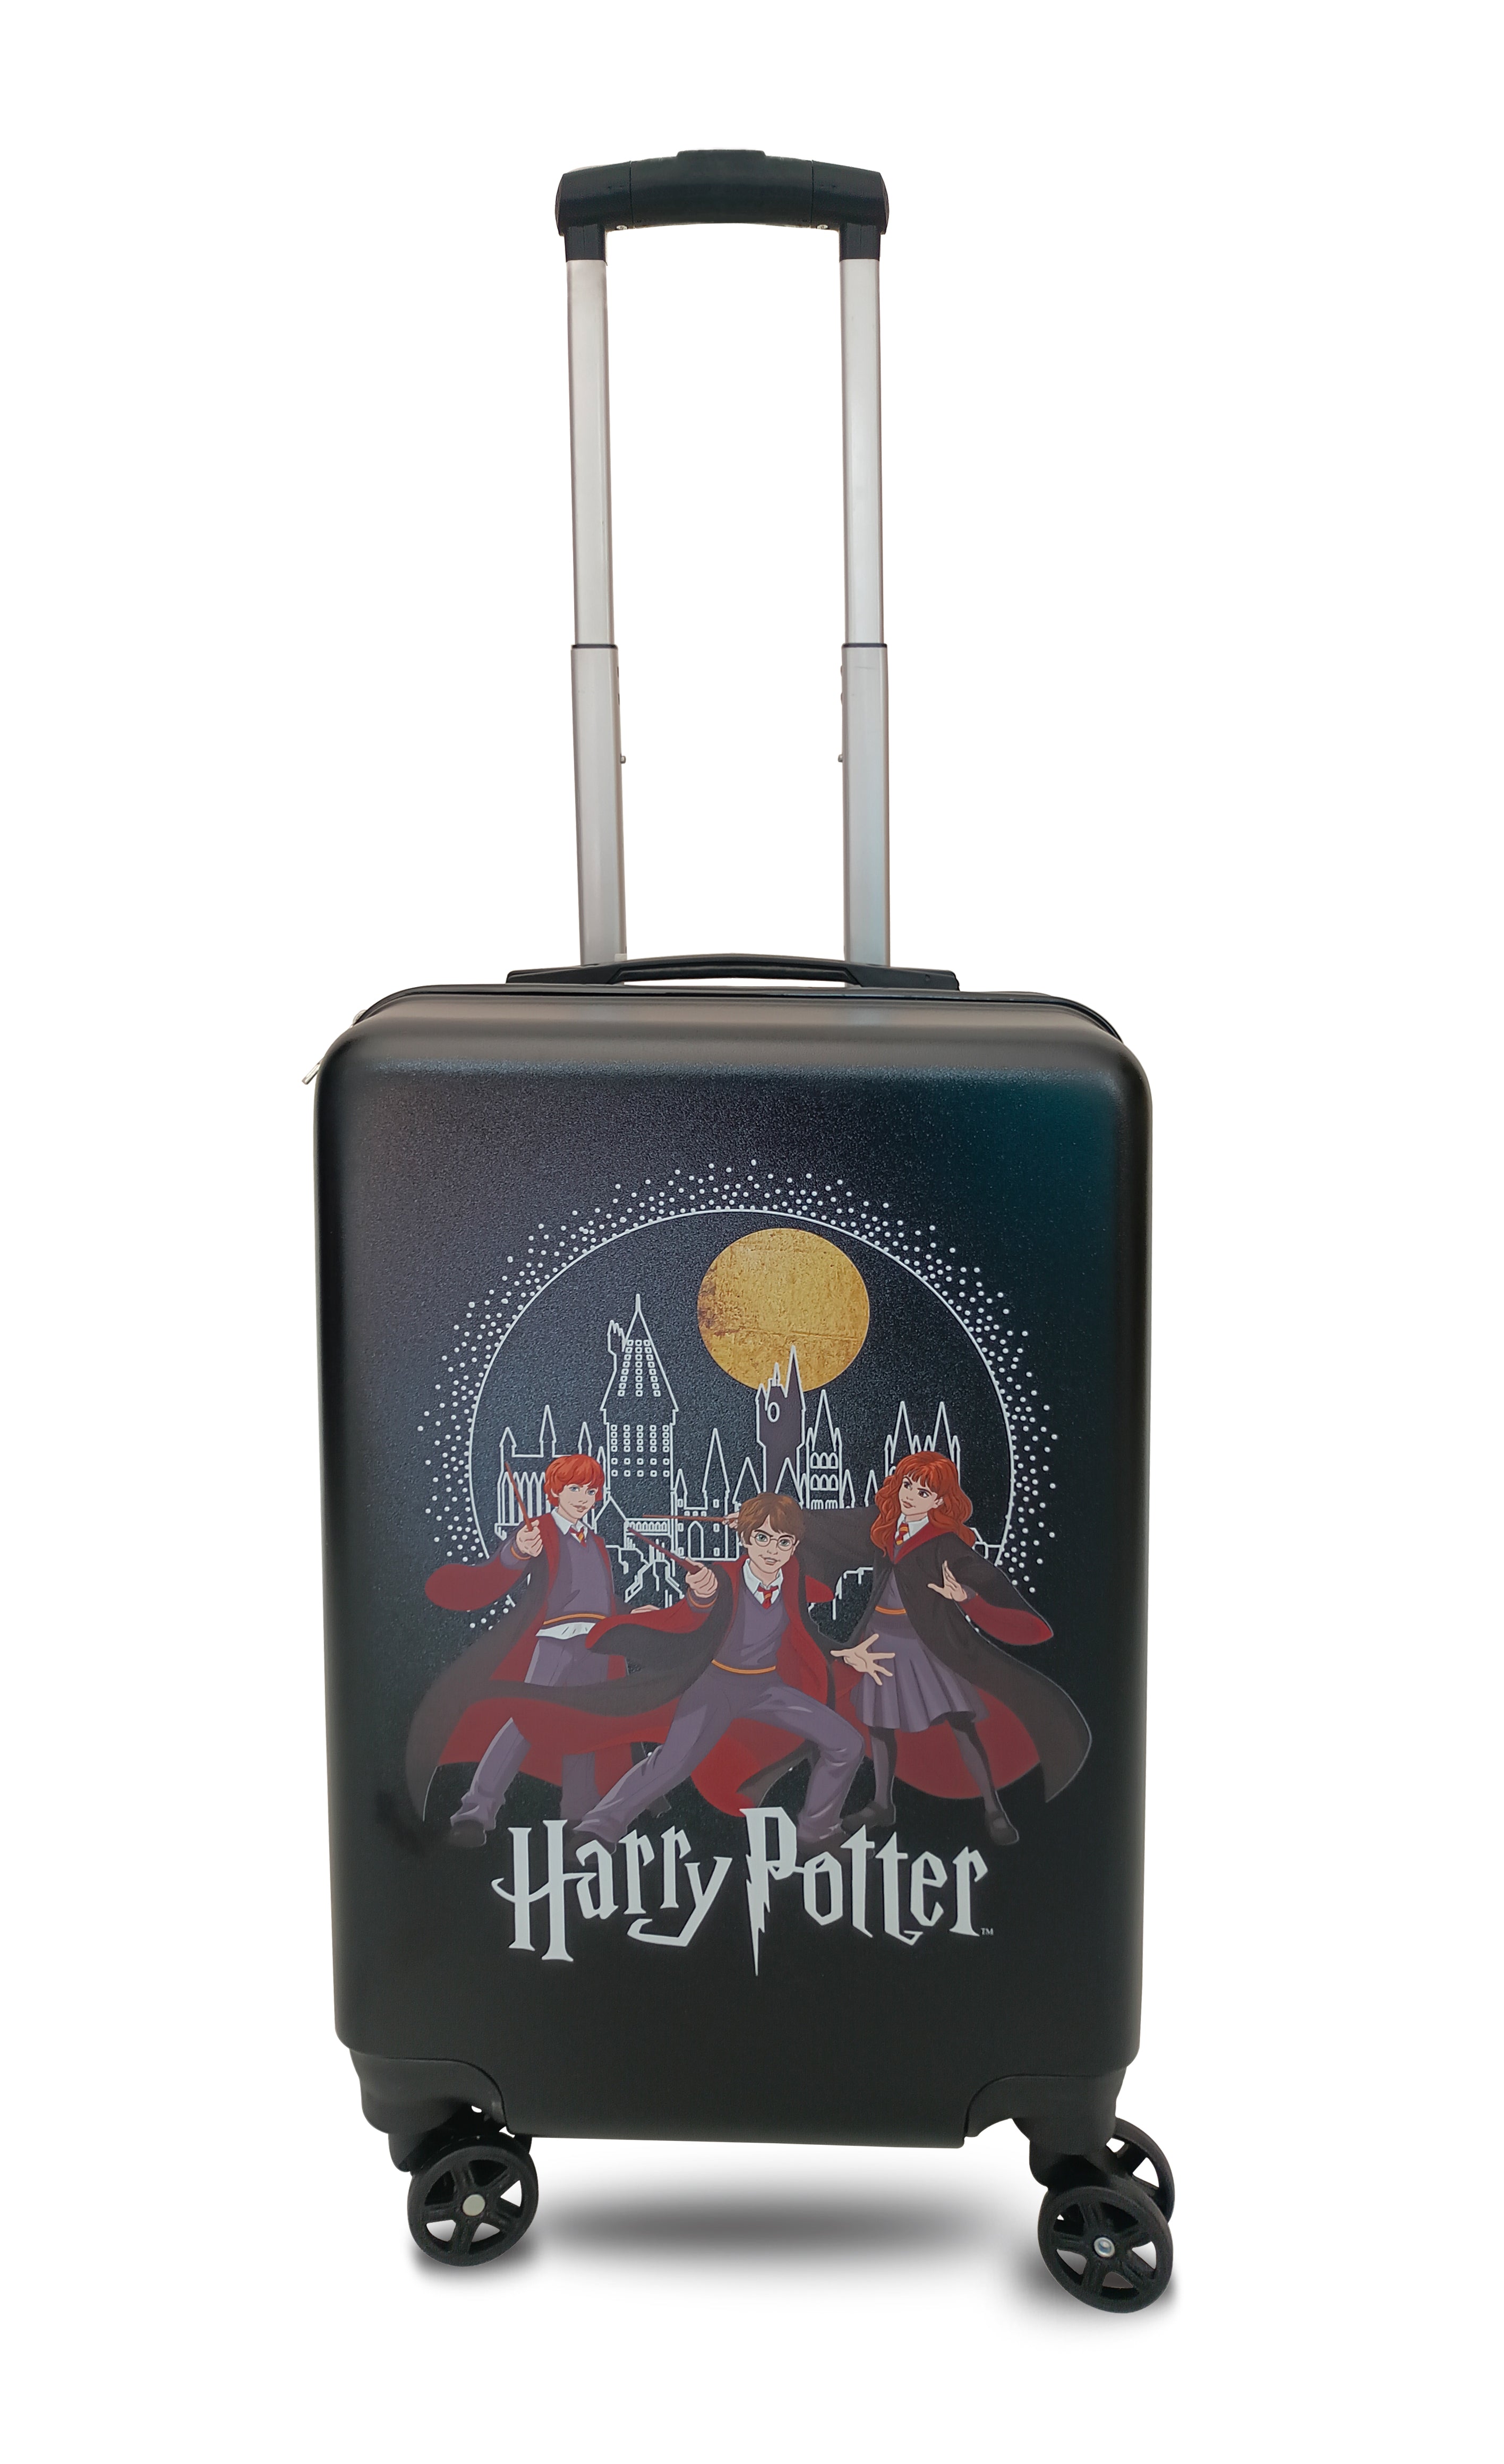 Harry Potter - 20in WB044 retro onboard suitcase - Black